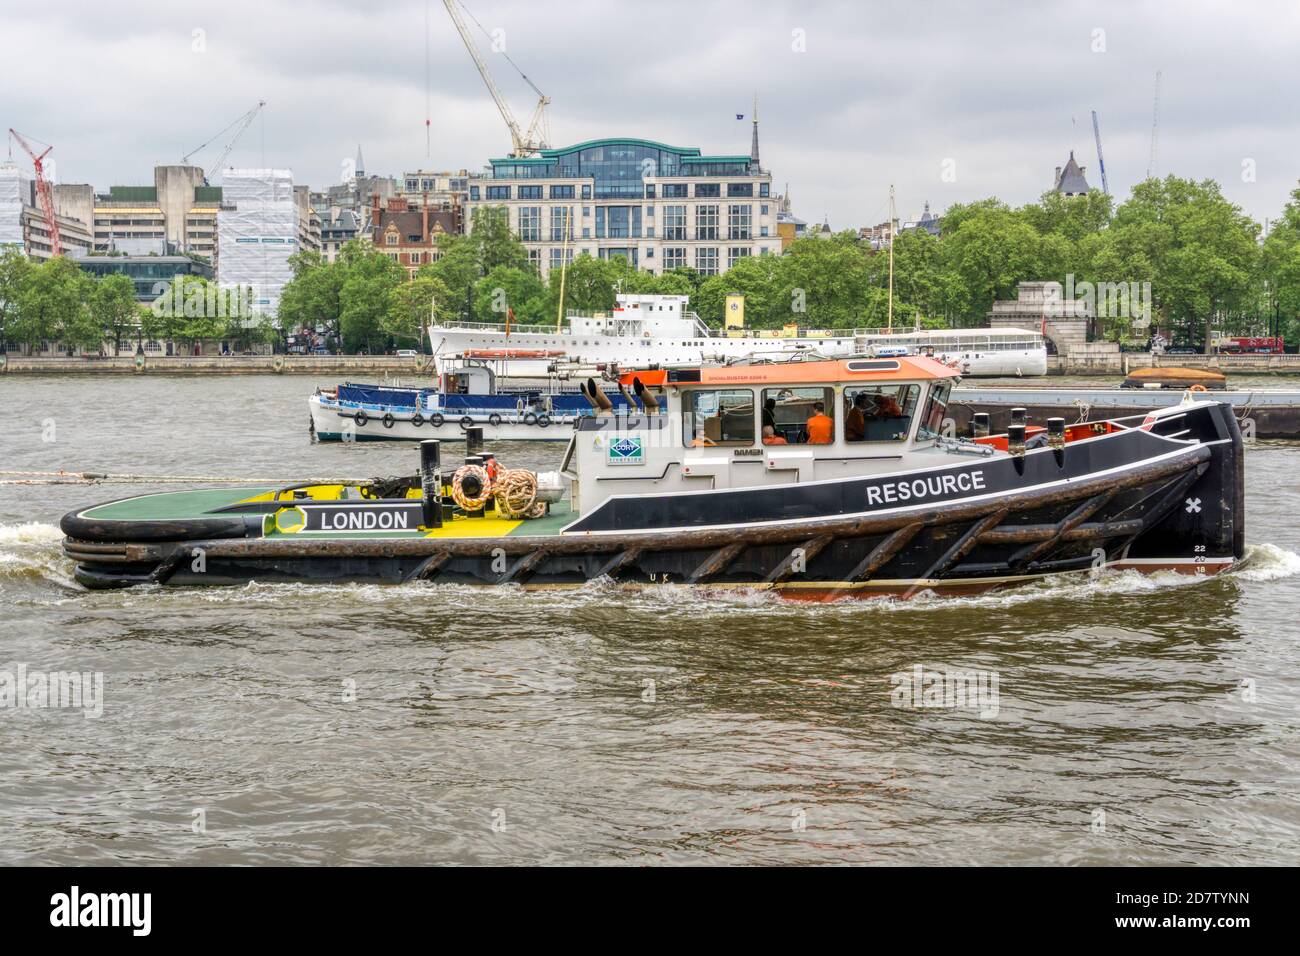 The tug Resource on the River Thames in London. Stock Photo